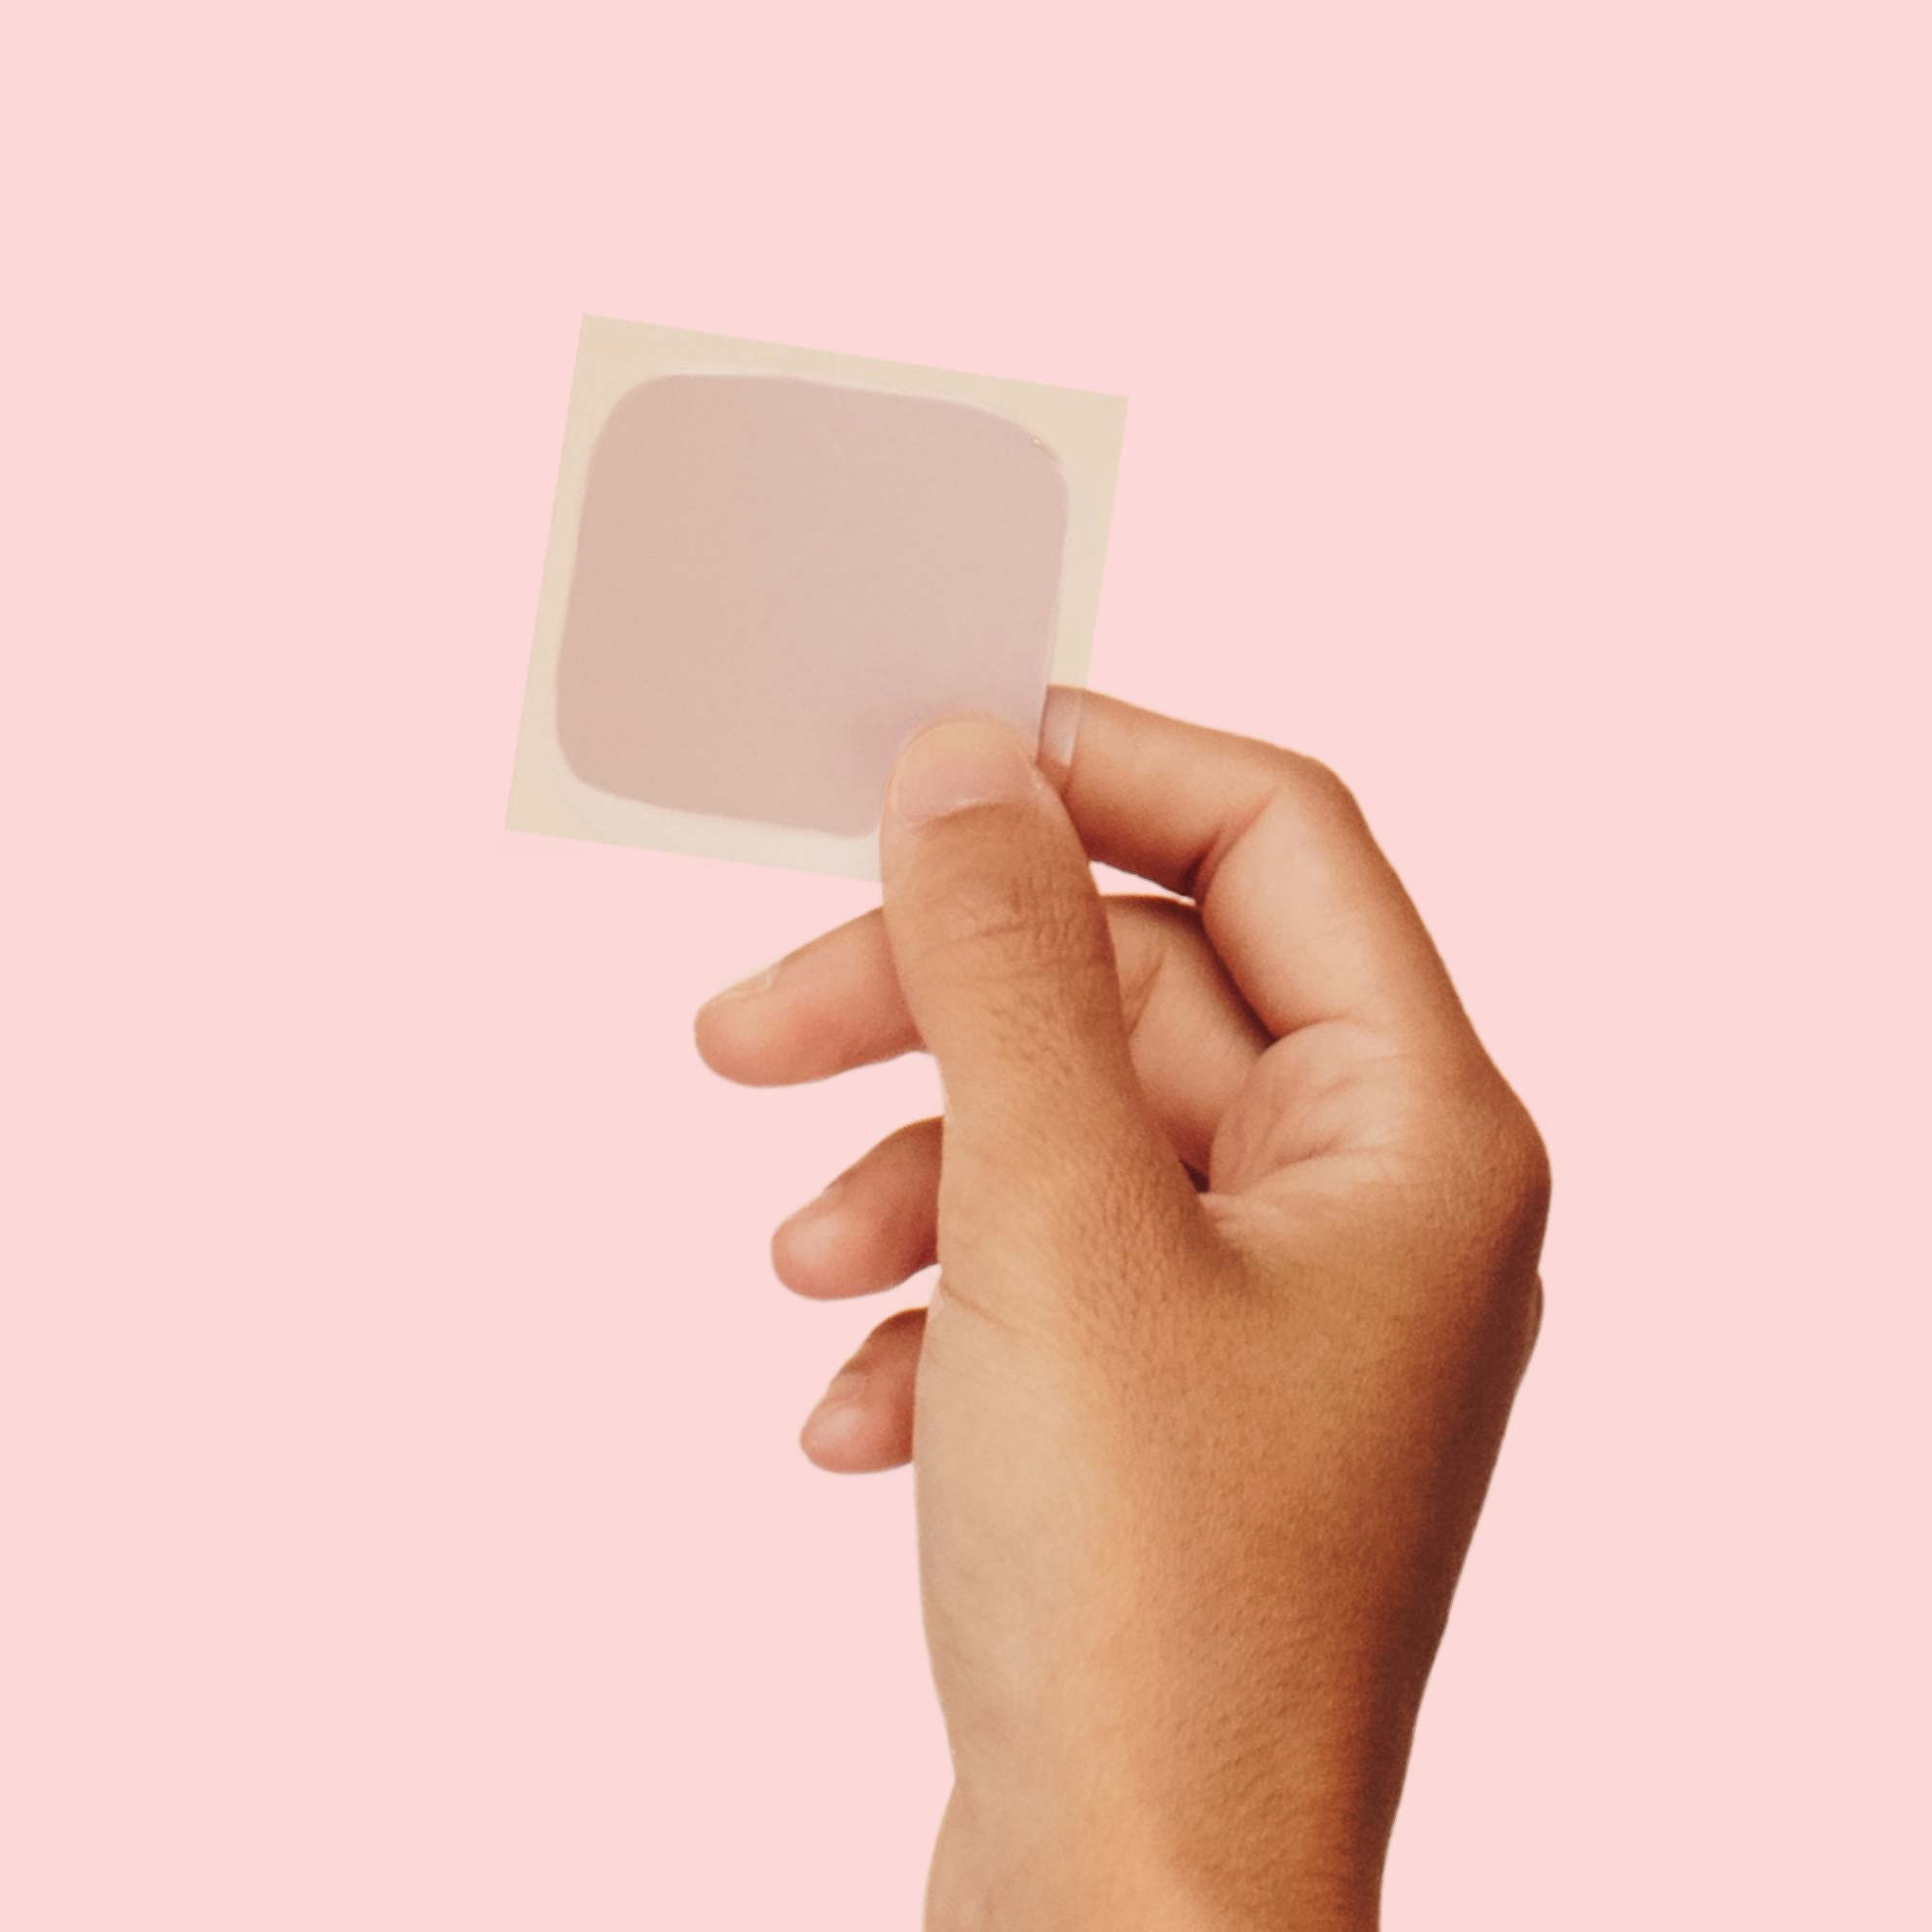 A woman's hand holding a birth control patch in front of a pink background